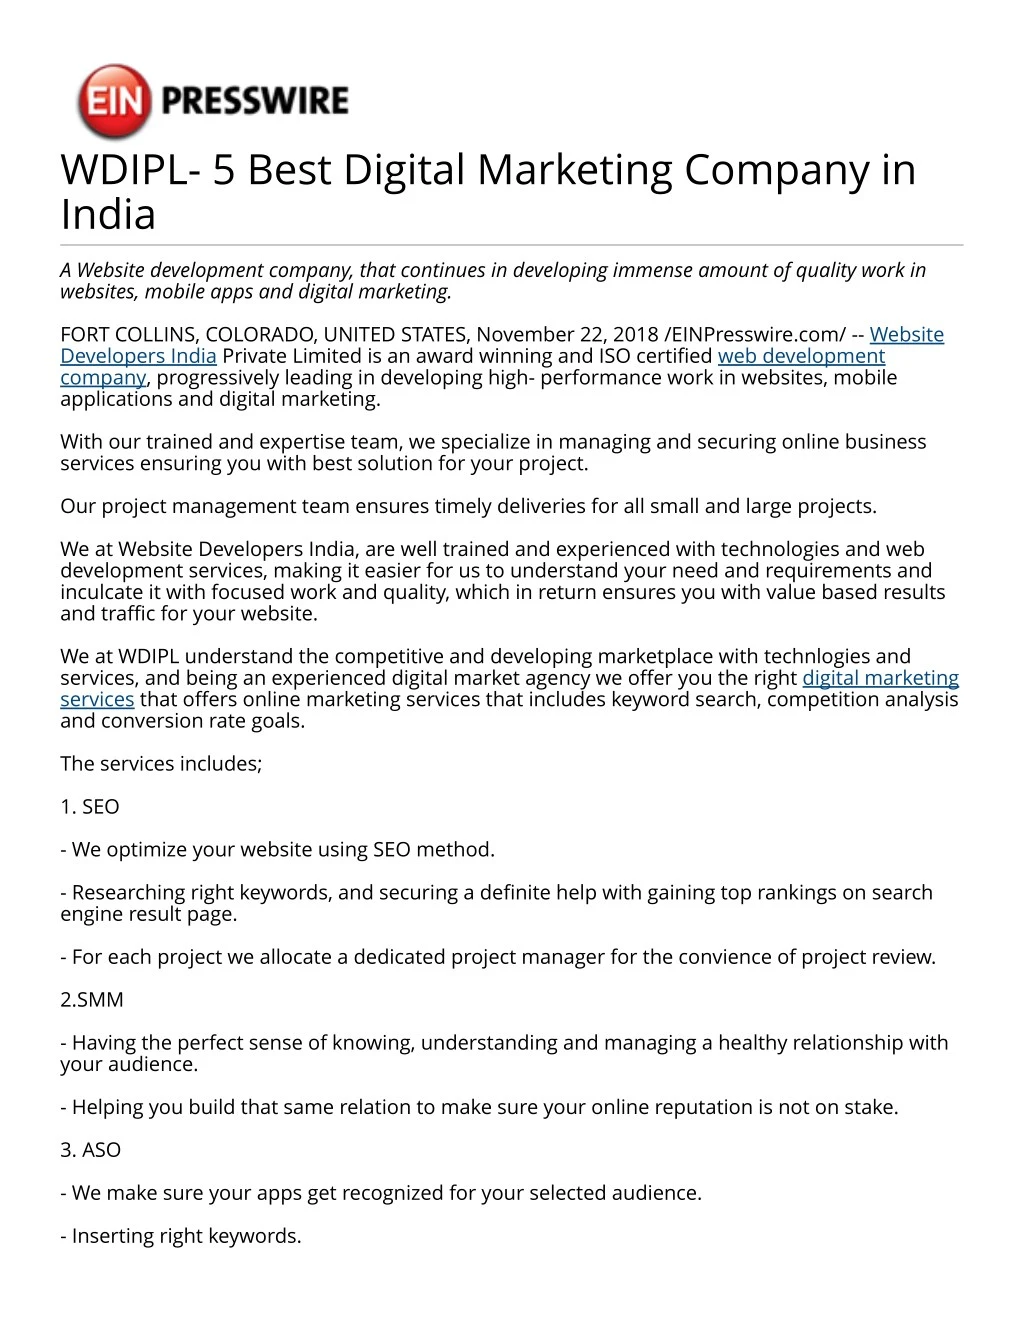 wdipl 5 best digital marketing company in india